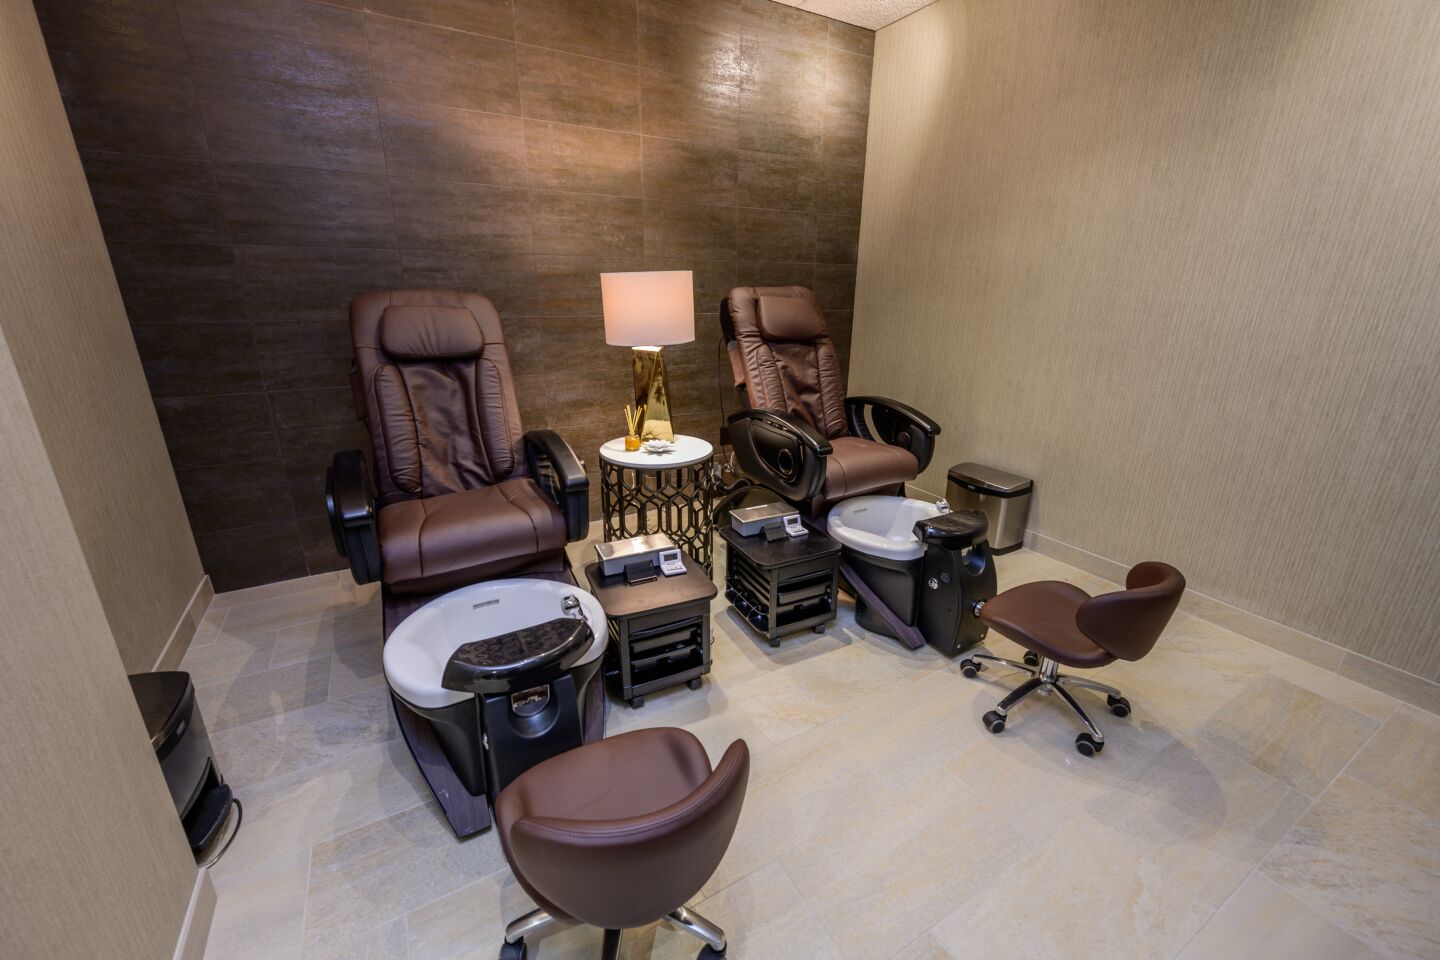 The spa offers many services, such as manicures and pedicures.